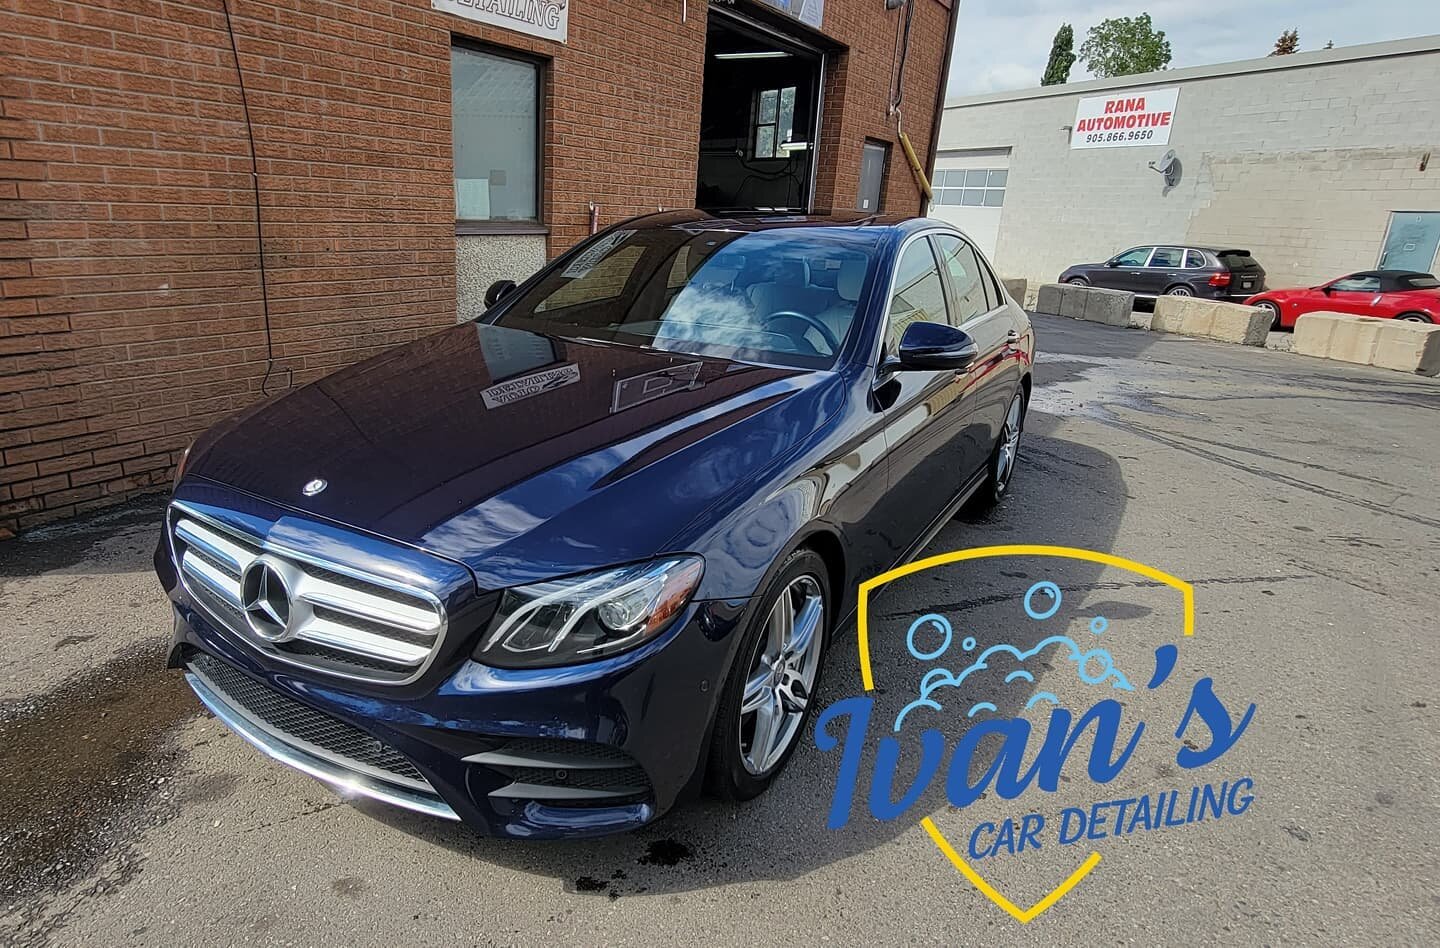 Full detail on the beautiful Mercedes Benz. Book with us today on our website www.ivancardetailing.com

#ivansmobilecardetailing #auto #autodetailing #car #cardetailing #mercedes #benz #toronto #mississauga #etobicoke #shop #detailingshop #local #fyp